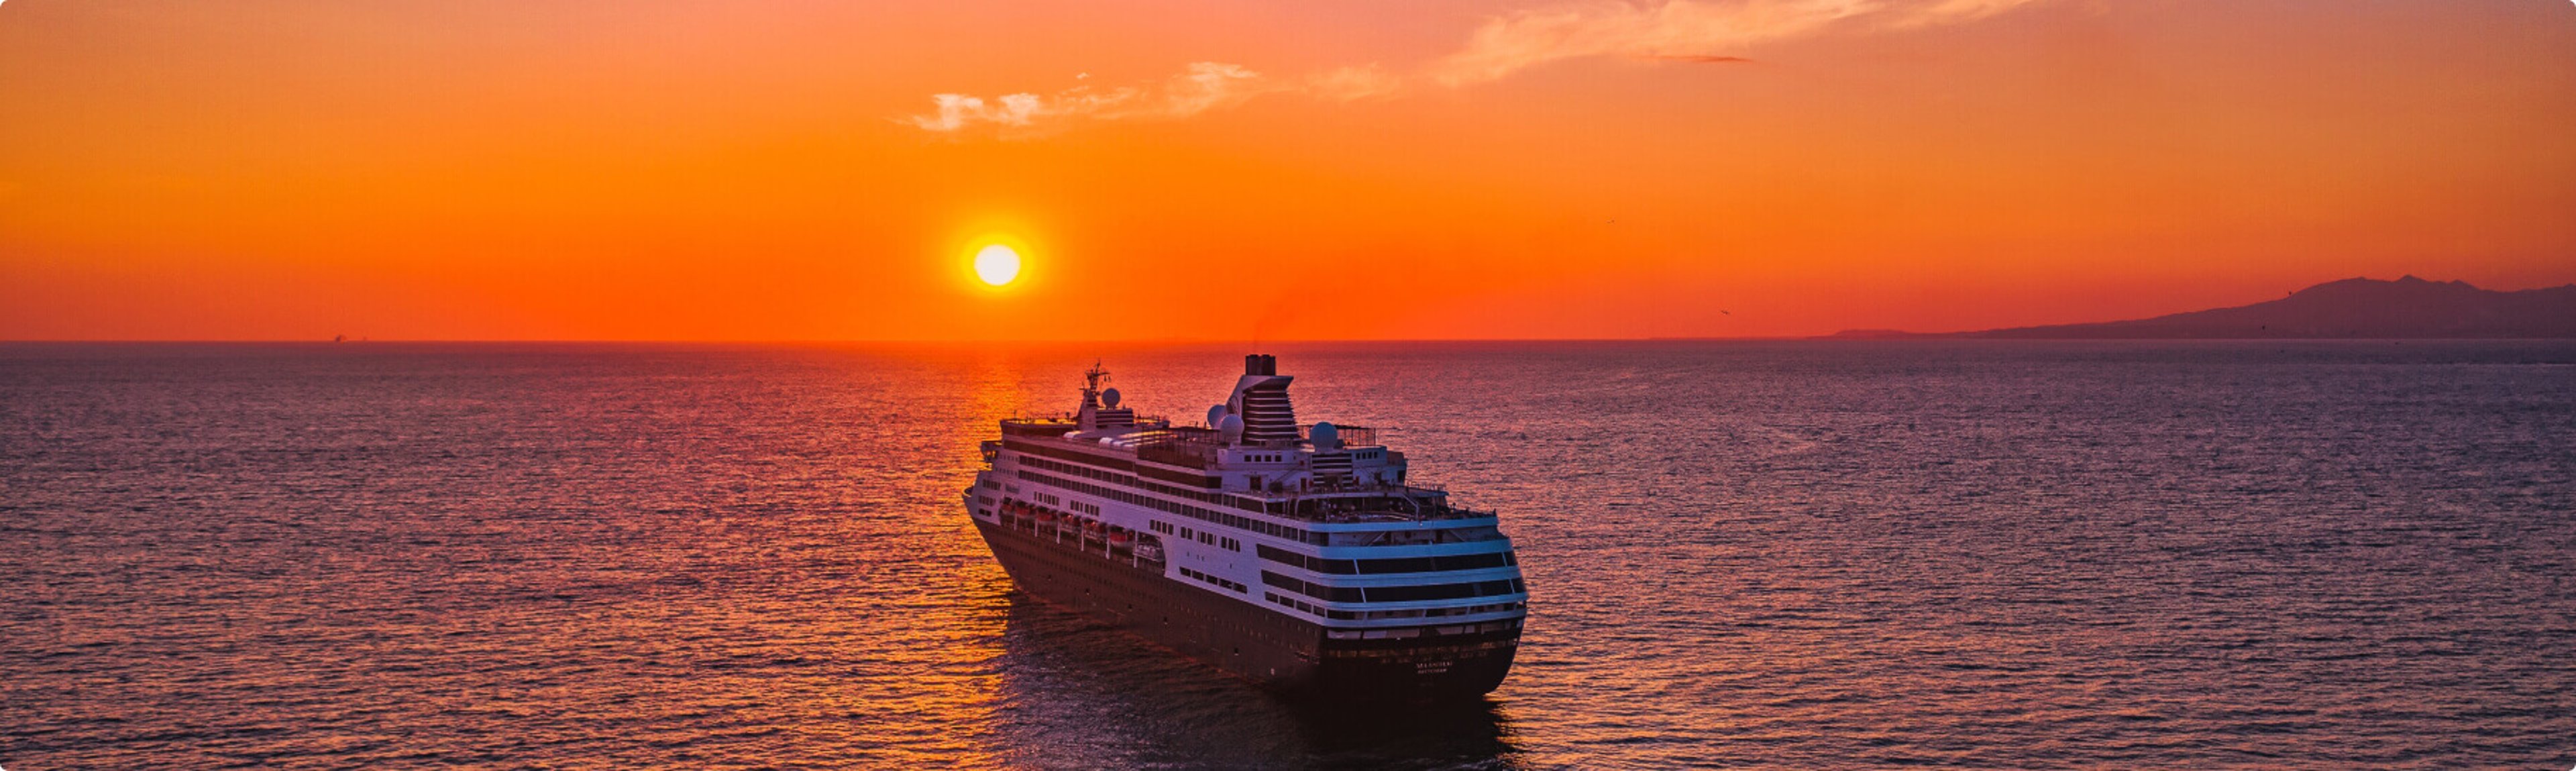 A majestic cruise ship sailing into a breathtaking sunset on the horizon.